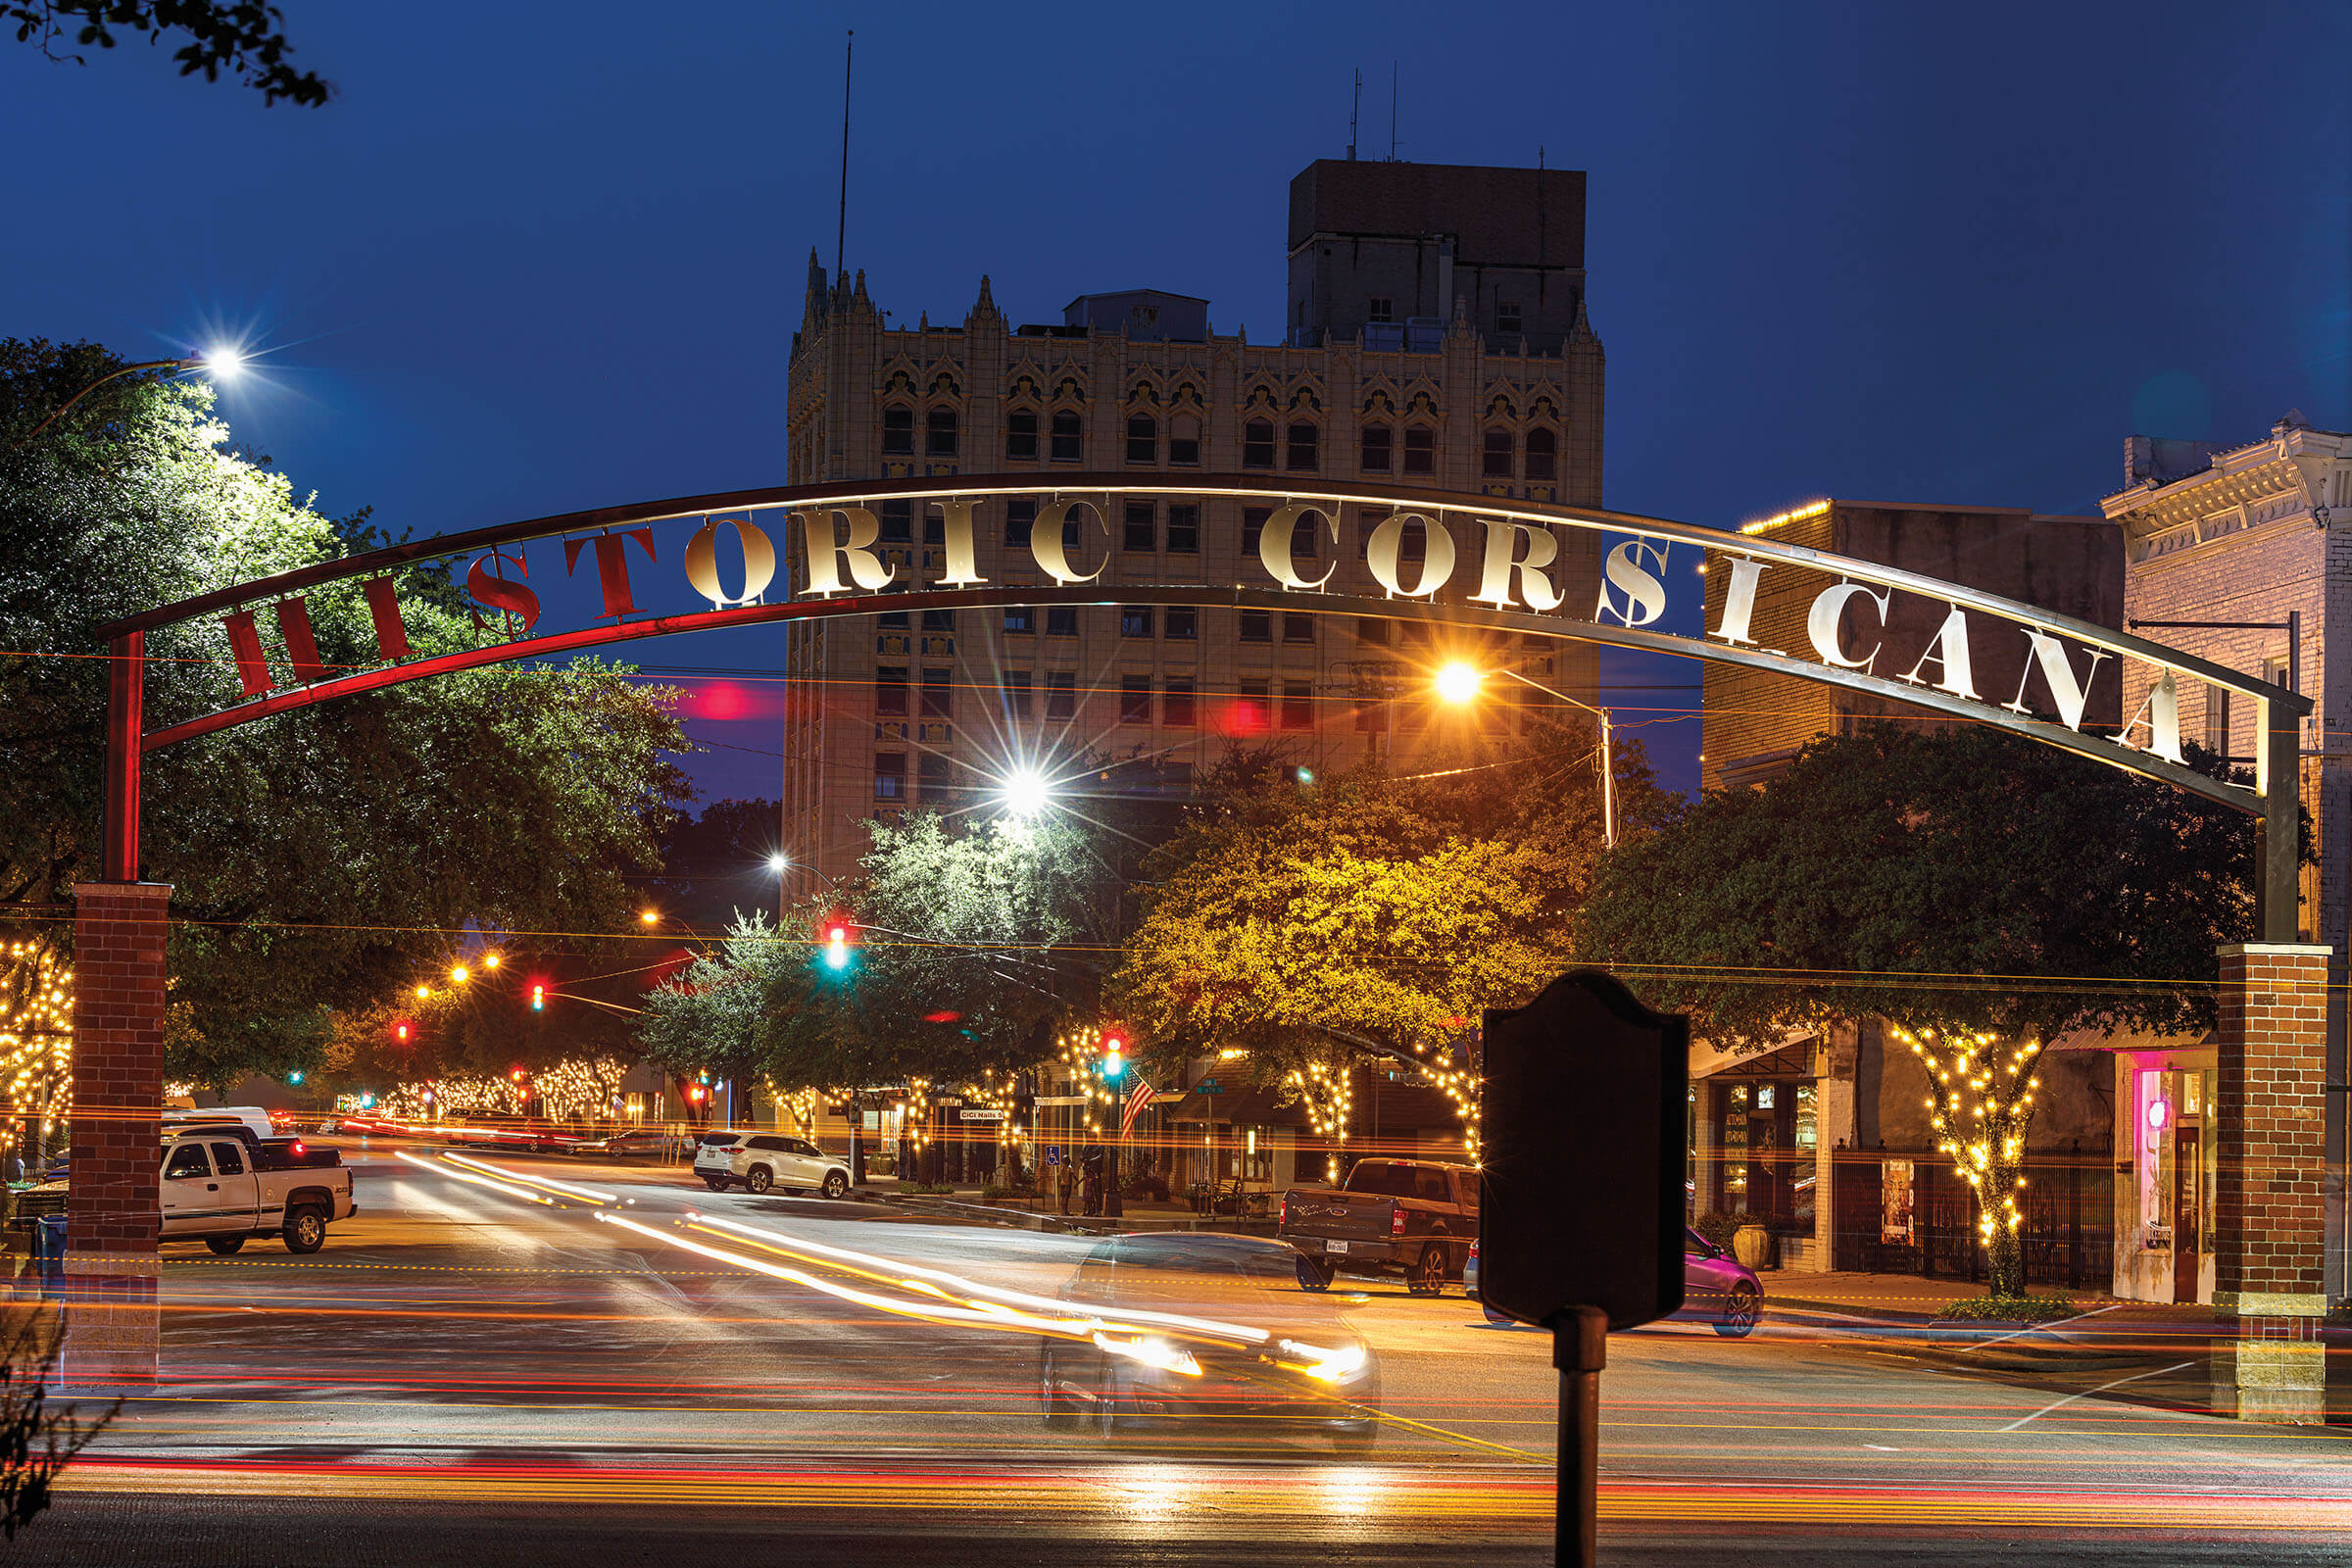 A nighttime view of an iron arch reading "Historic Corsicana" with the glow of car headlights and taillights